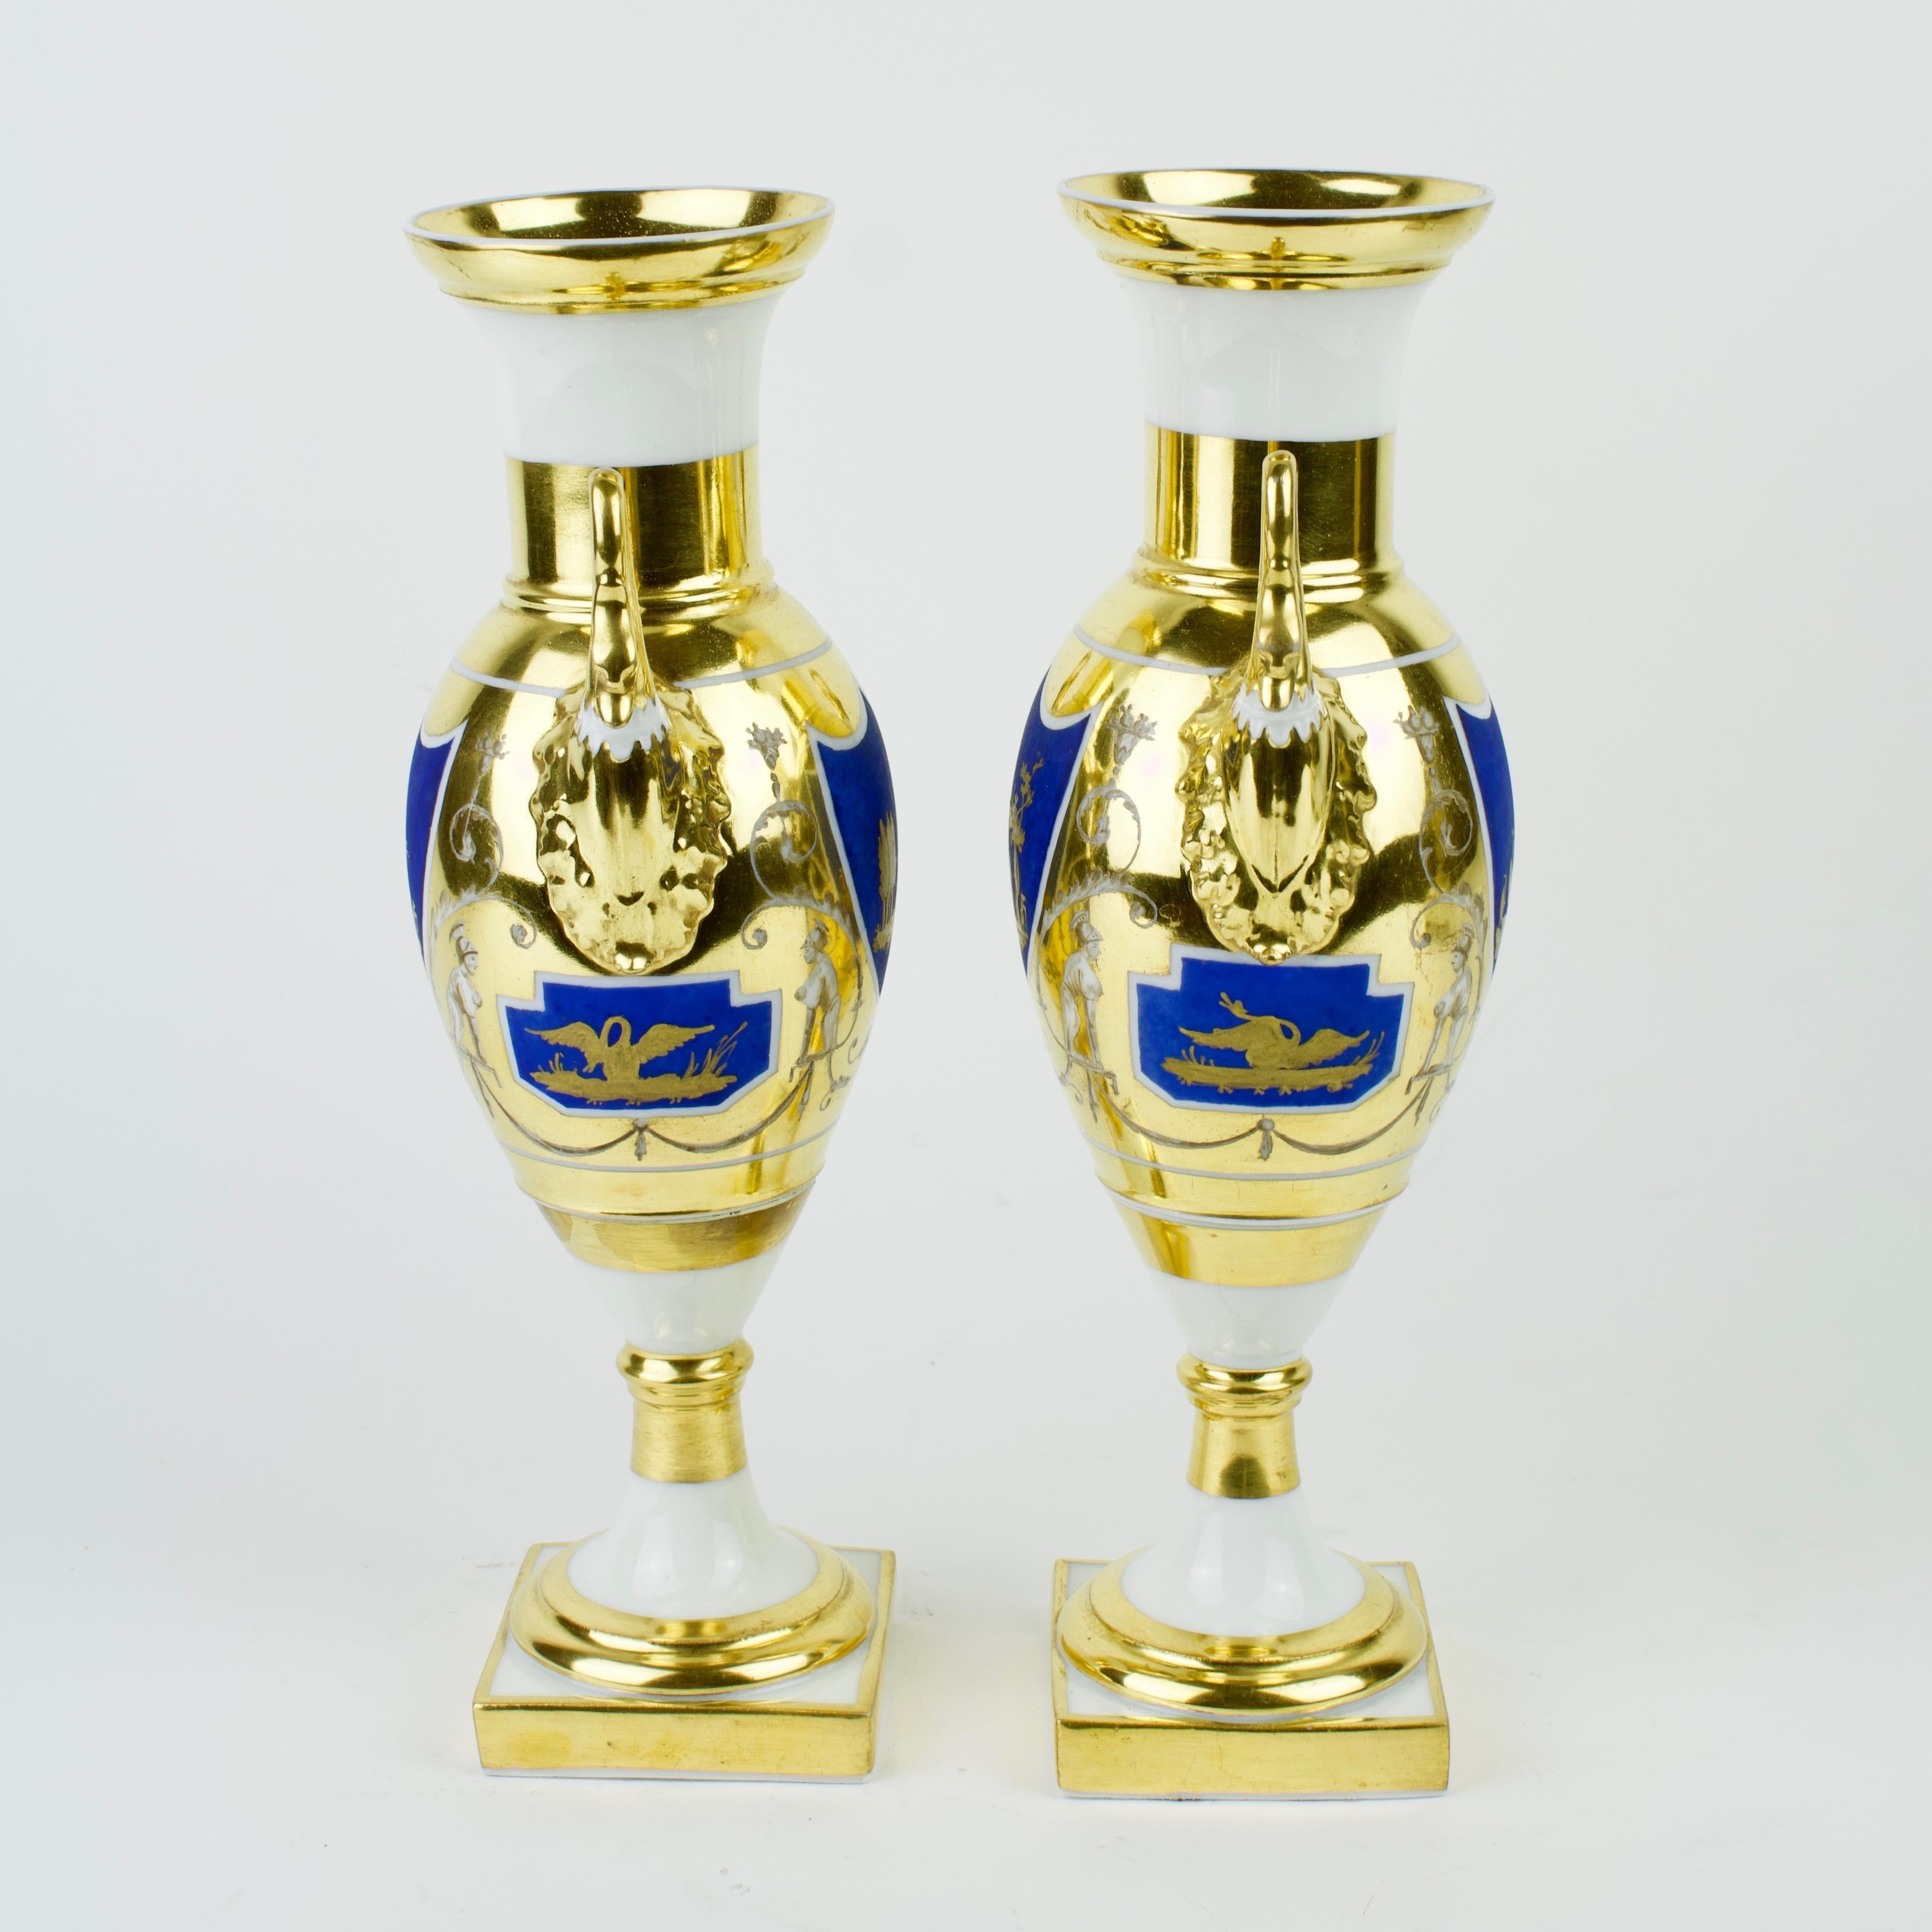 Empire Pair of Early 19th Century French/Paris Gilt and Painted Porcelain Amphora Vases